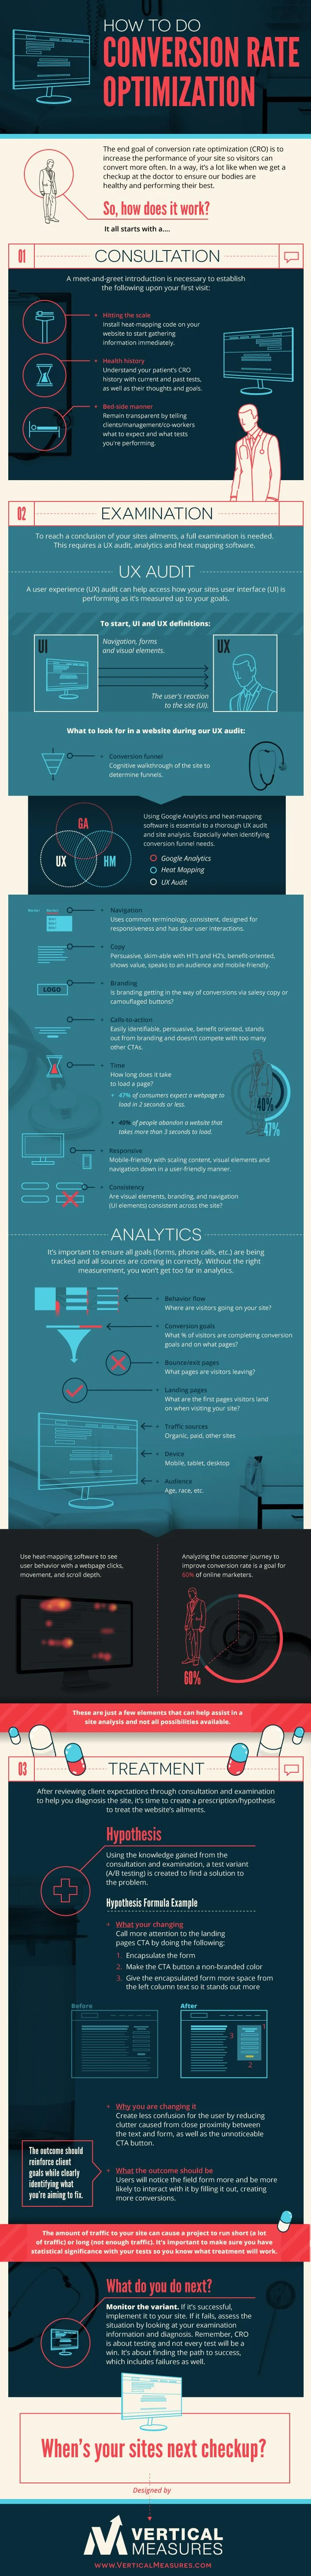 How To Do Conversion Rate Optimization - #infographic